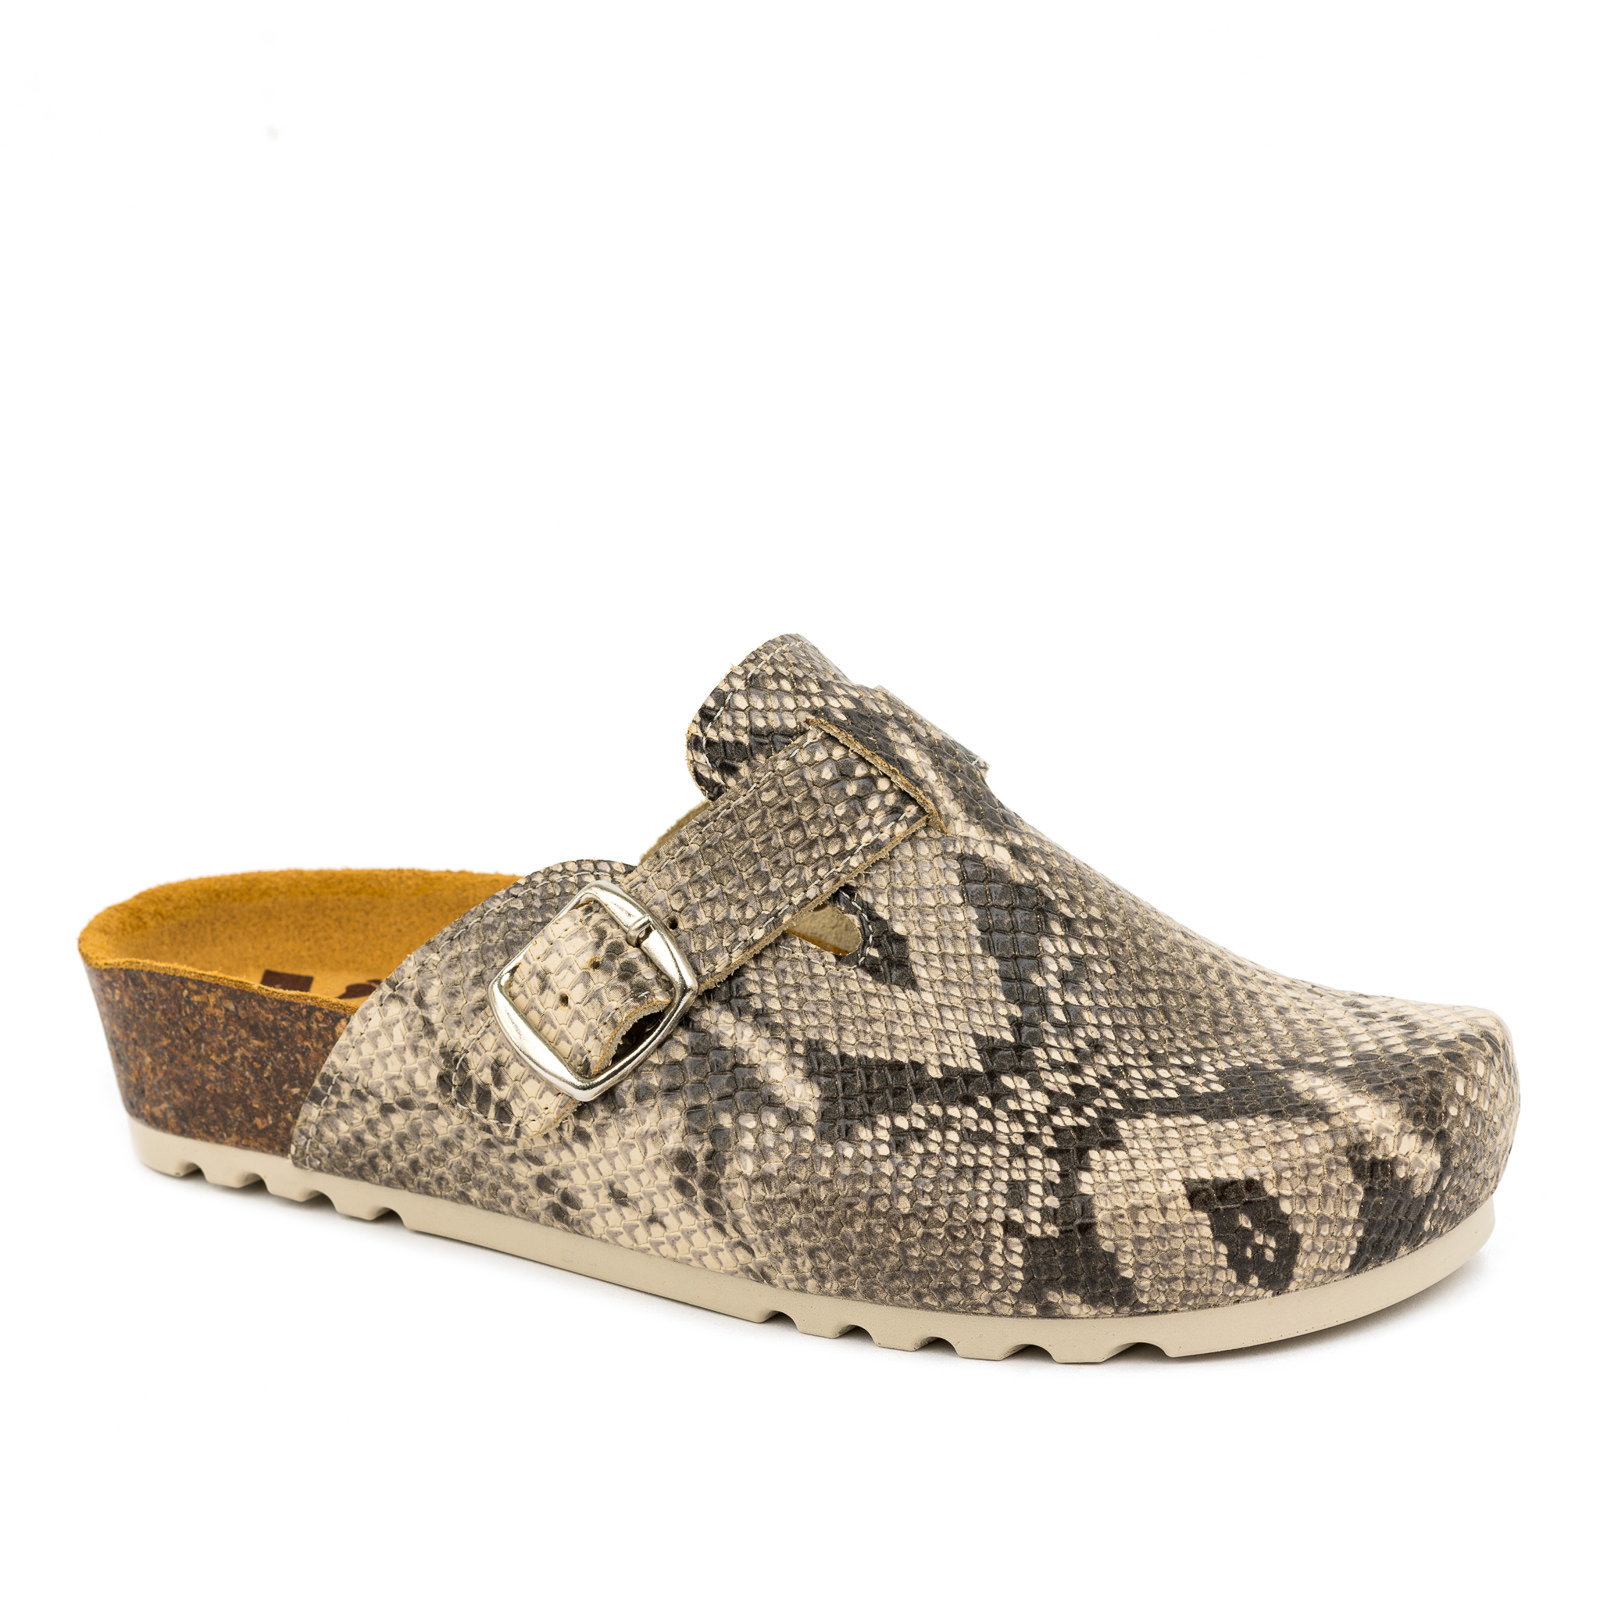 SNAKE LEATHER ANATOMIC CLOGS - BEIGE